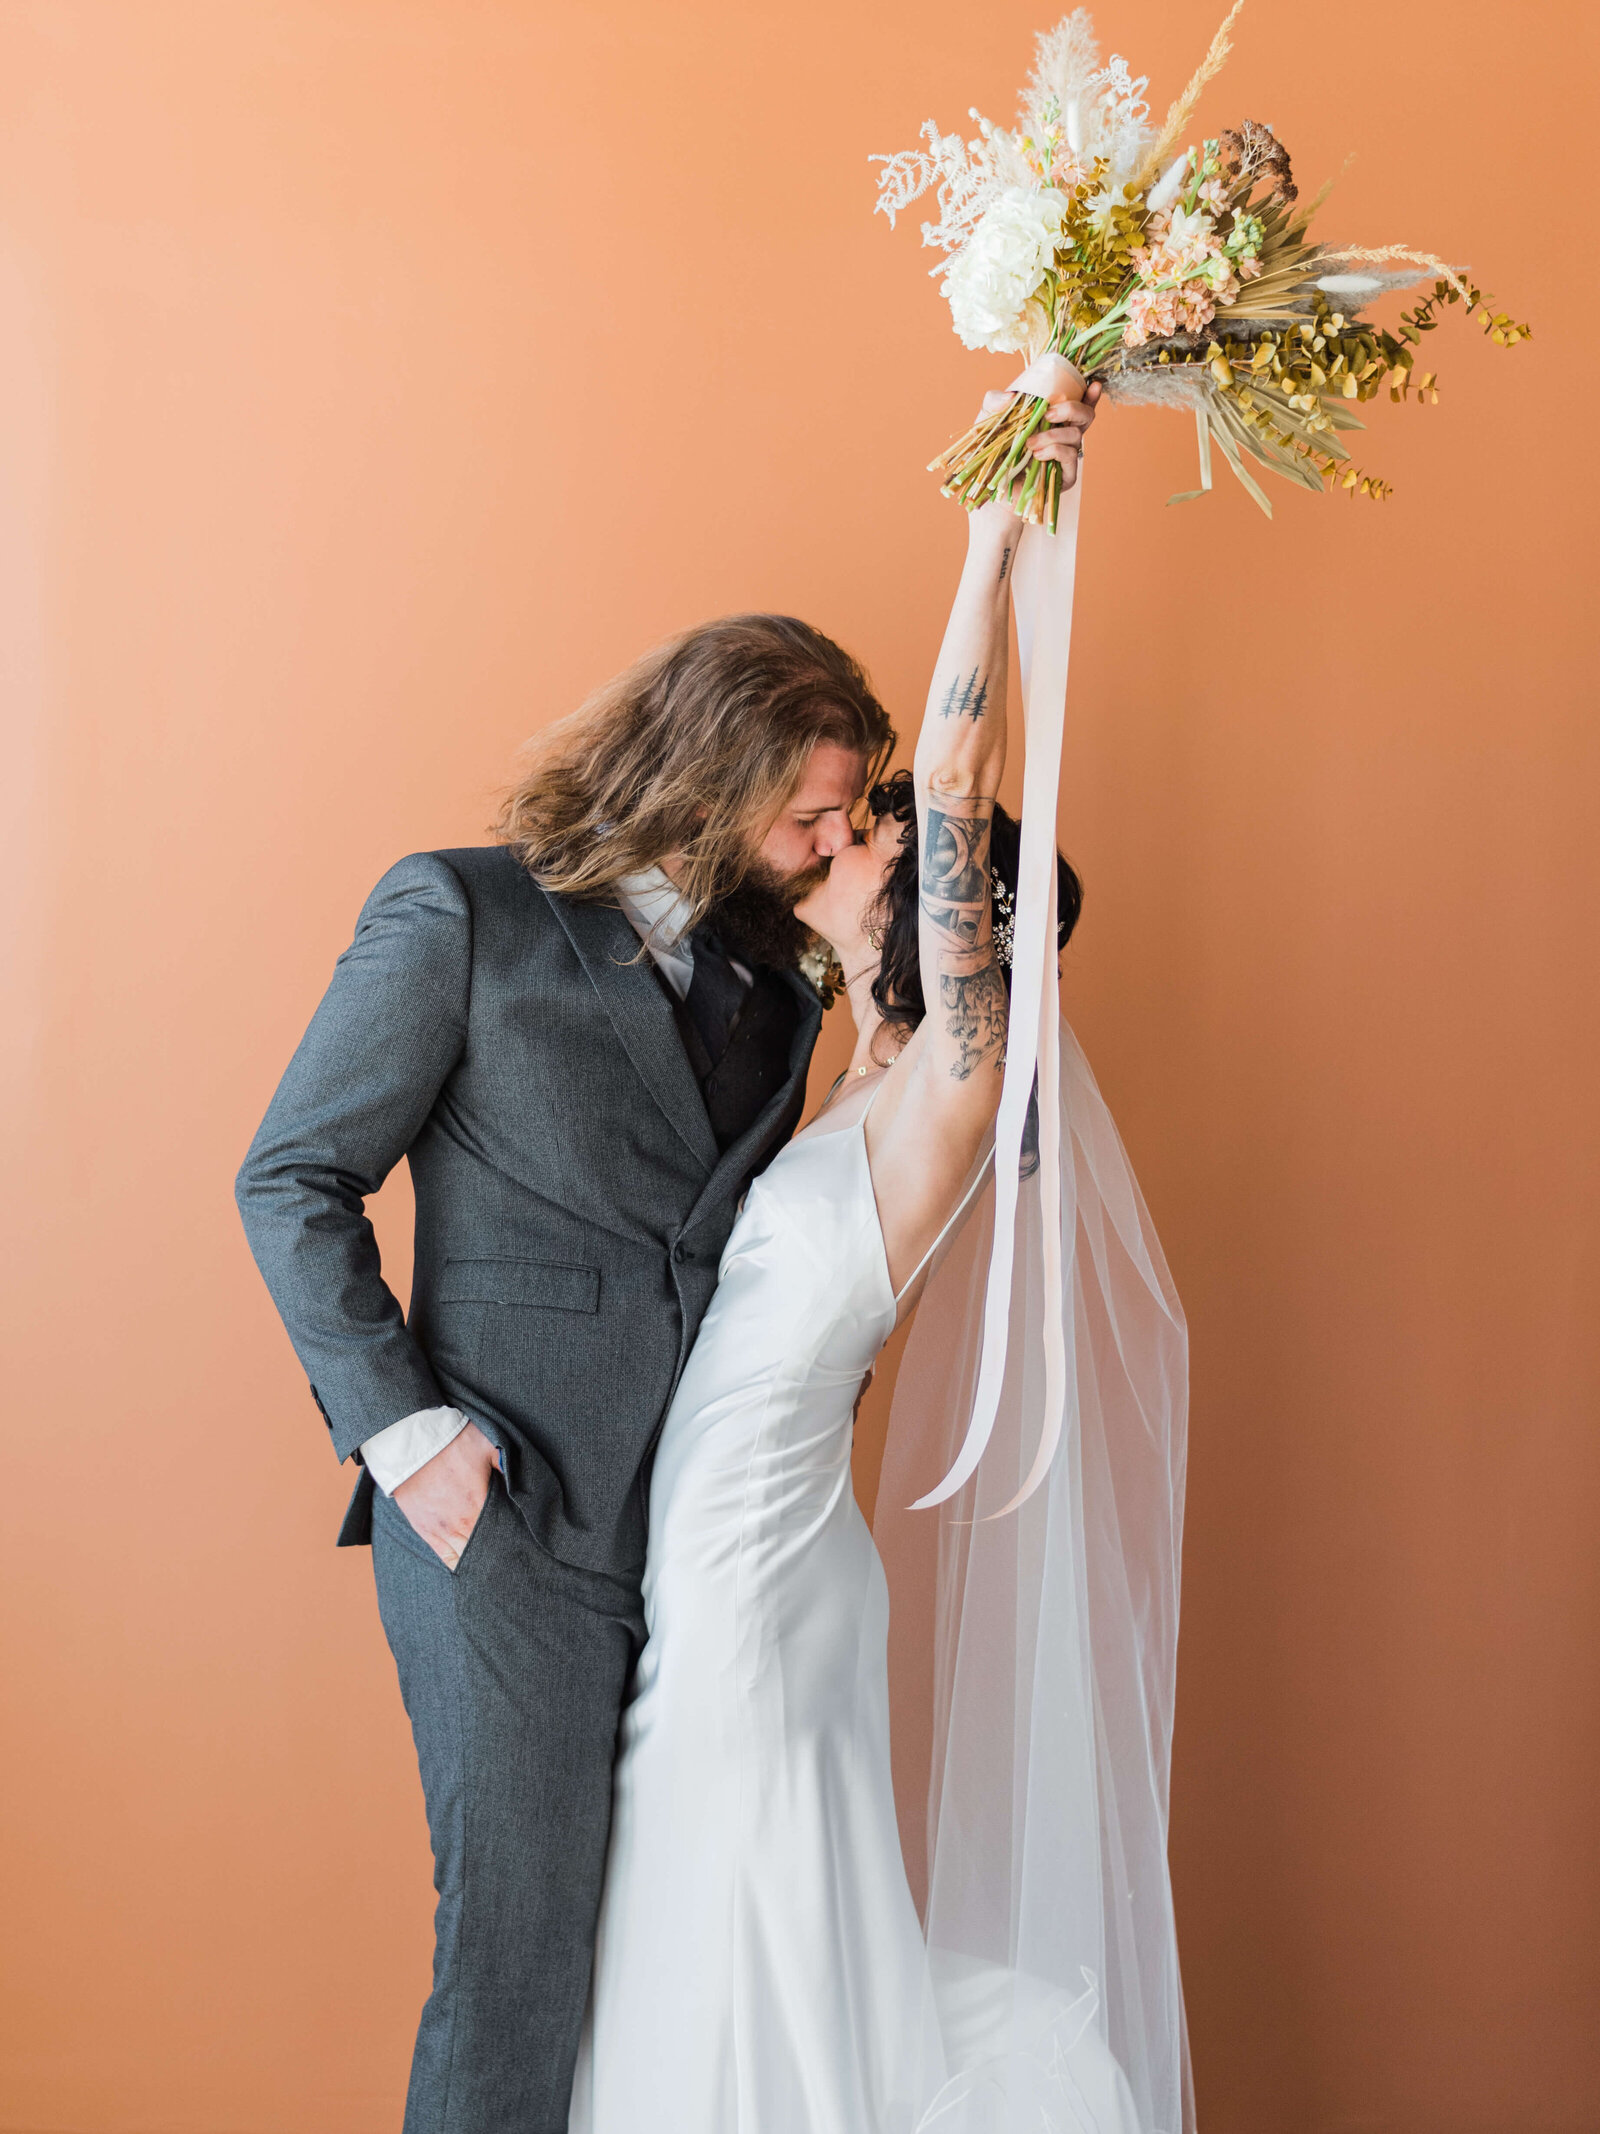 Husband and wife kiss and celebrate after getting married in a ceremony captured by Virginia Wedding Photographer